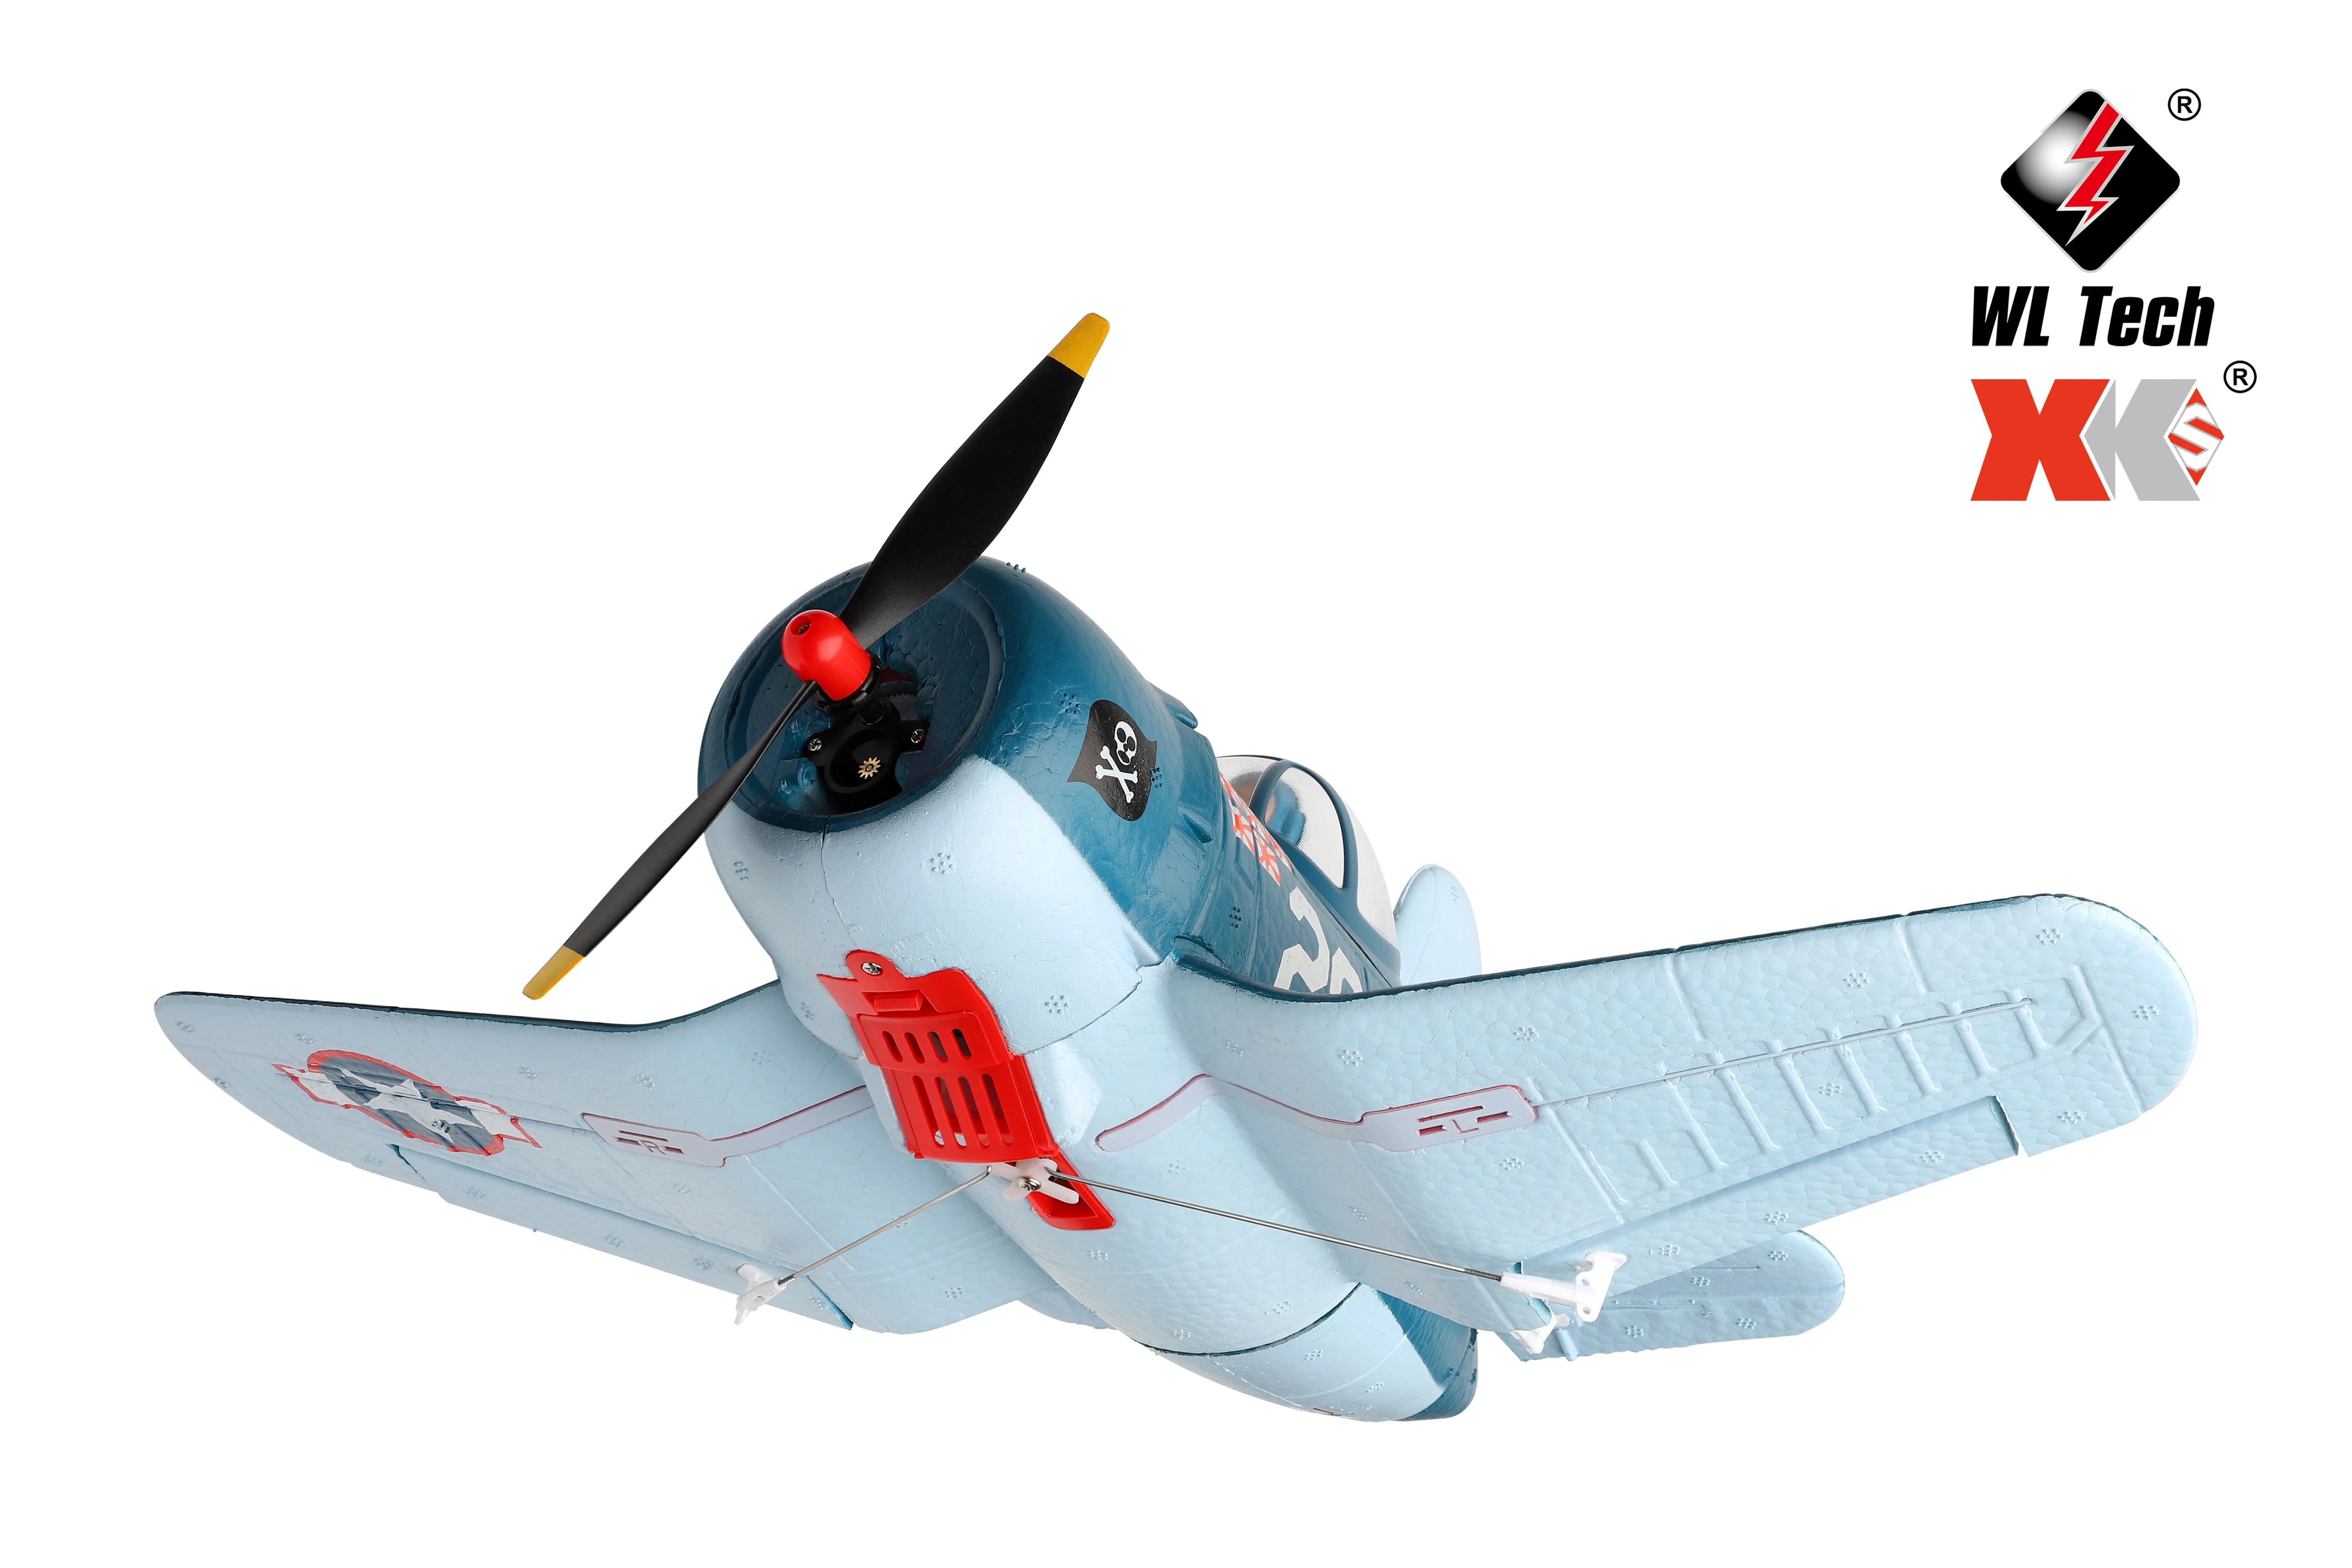 WLtoys XK A500  A250 RC Plane, the remote control 6G/3D mode can be switched at will . the 6G mode